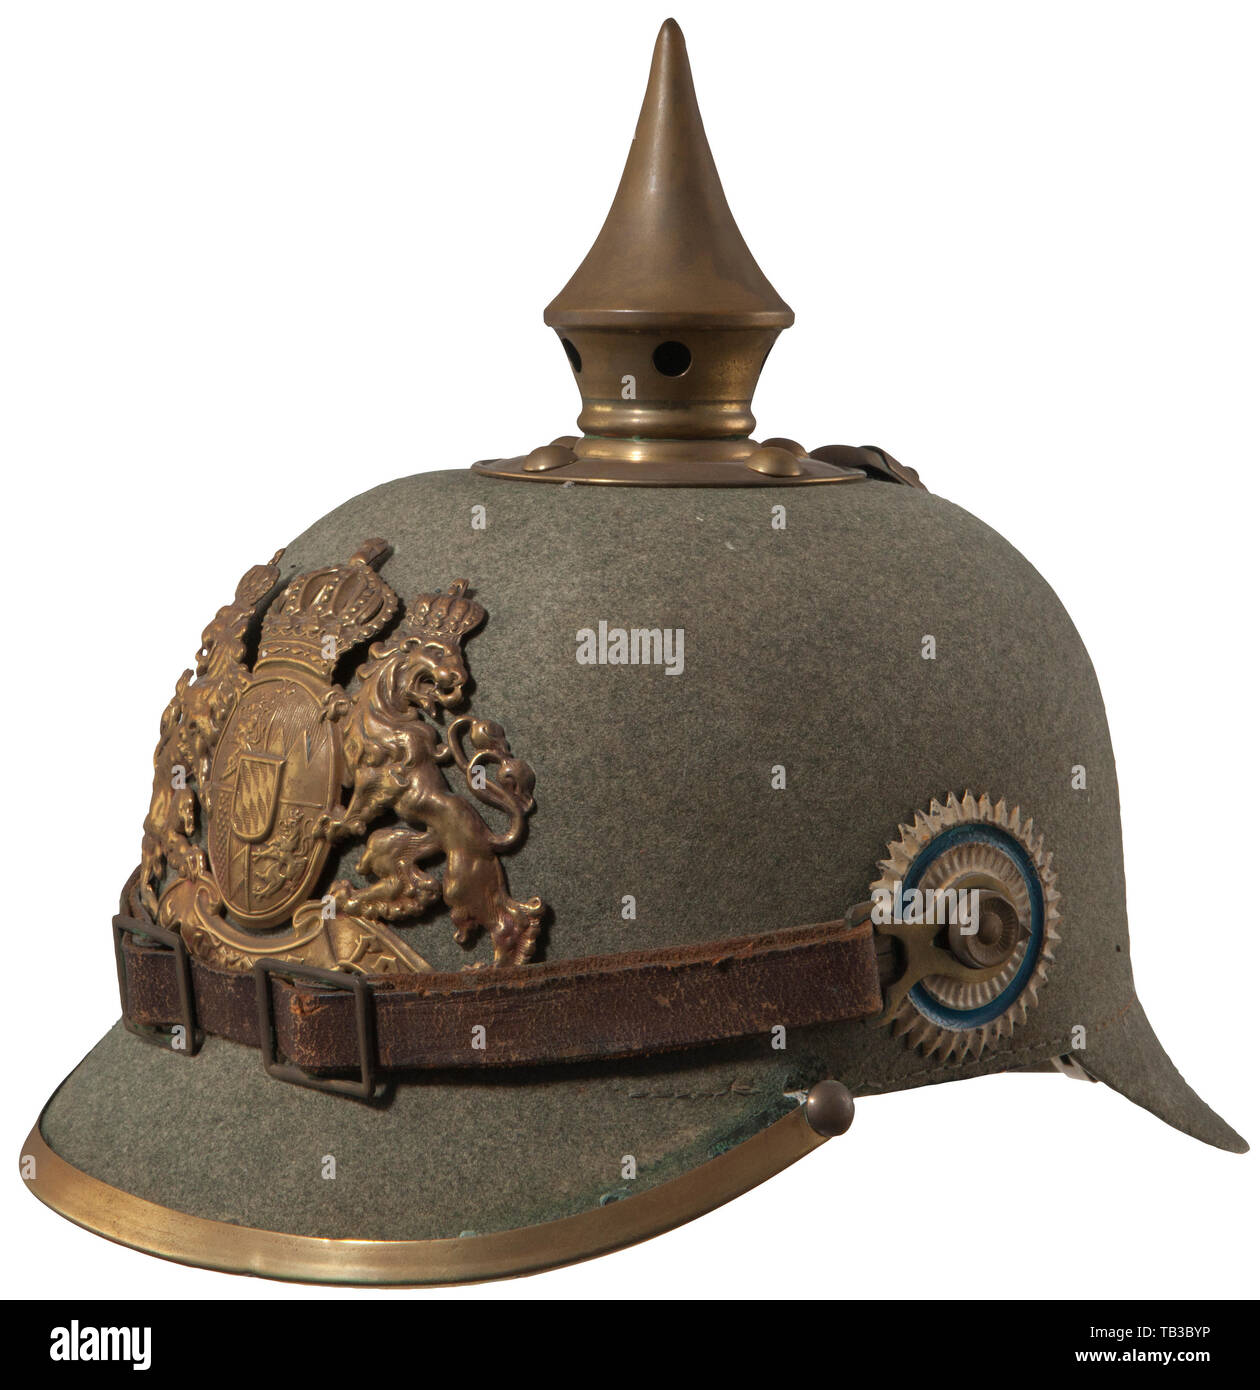 An Imperial German cork war model Bavarian enlisted men infantry spike helmet, Green cork body with front and rear visors, gold Bavarian enlisted men front plate attached by two loops and leather strips. Gold spike base, spike, spline, base studs and front visor. Brown leather chinstrap with brass buckles and M 91 lug side posts, black leather liner, front visor trim is loose. Fine example of this war model spike. USA-lot. 20th century, 1910s, First World War / WWI, world war, world wars, historic, historical, Additional-Rights-Clearance-Info-Not-Available Stock Photo